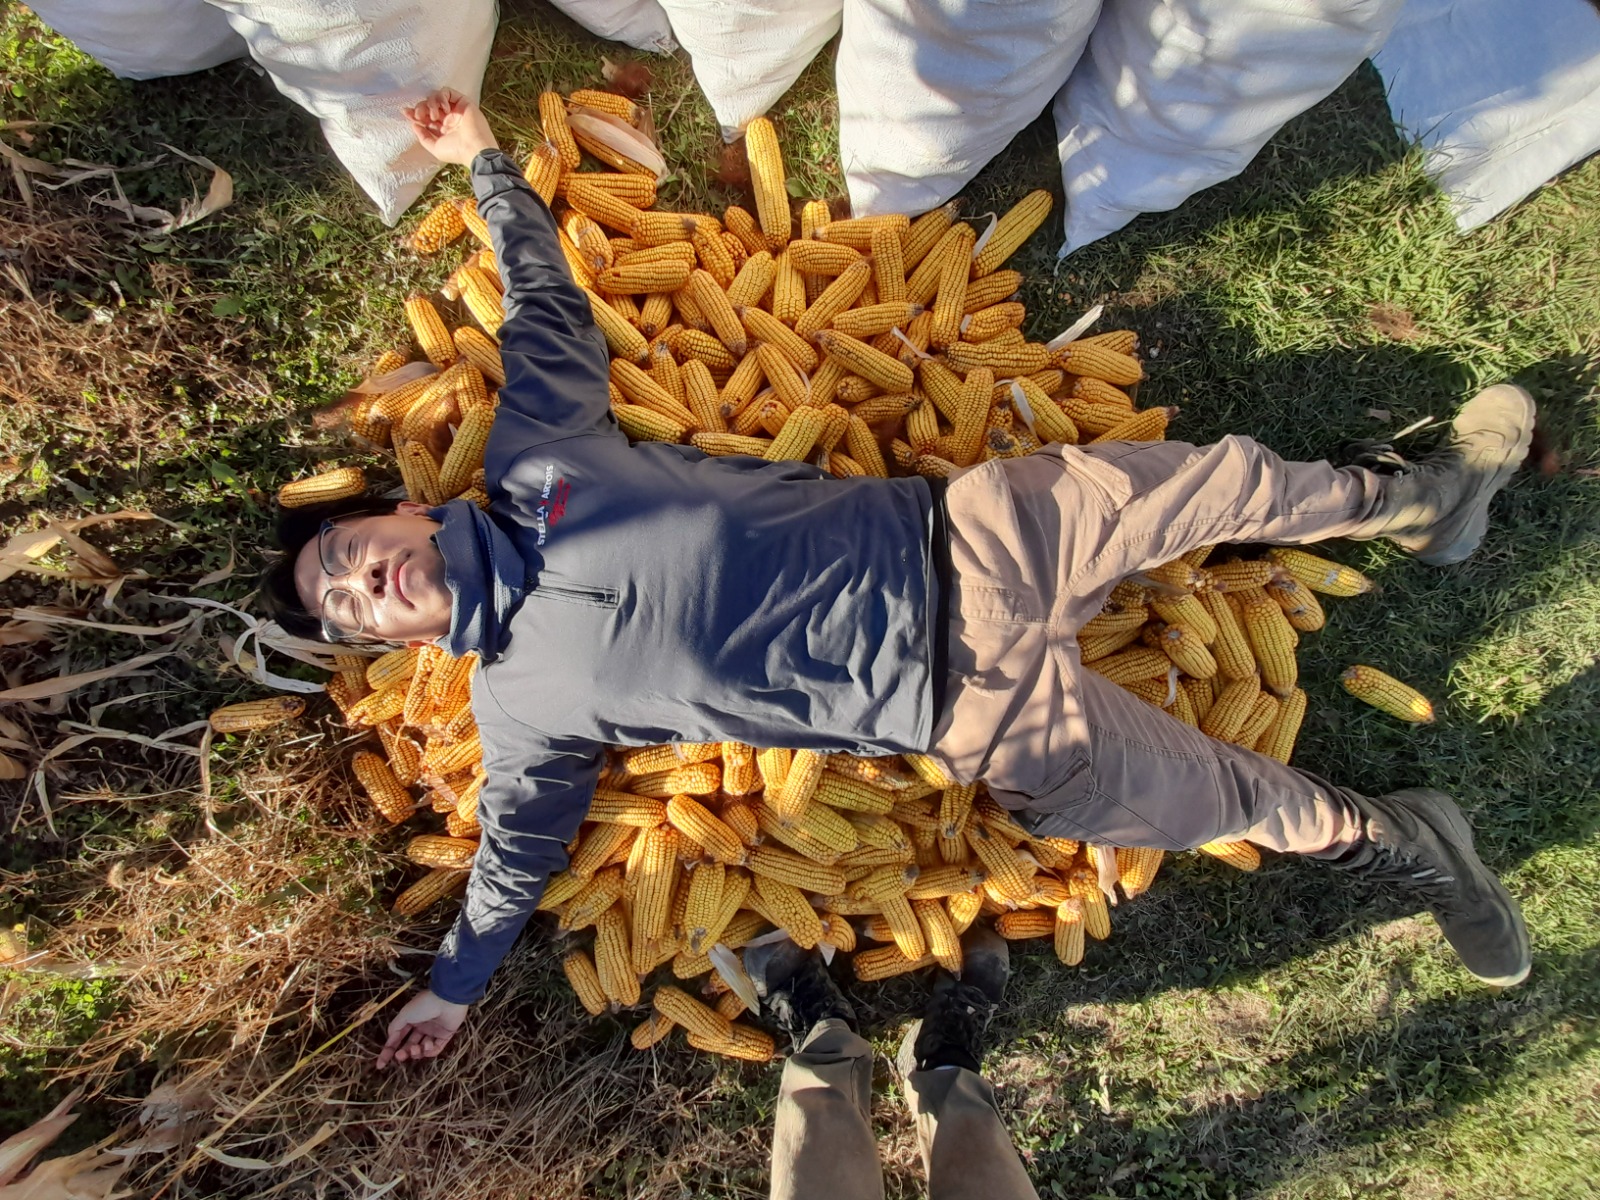 A man laying on a pile of corn